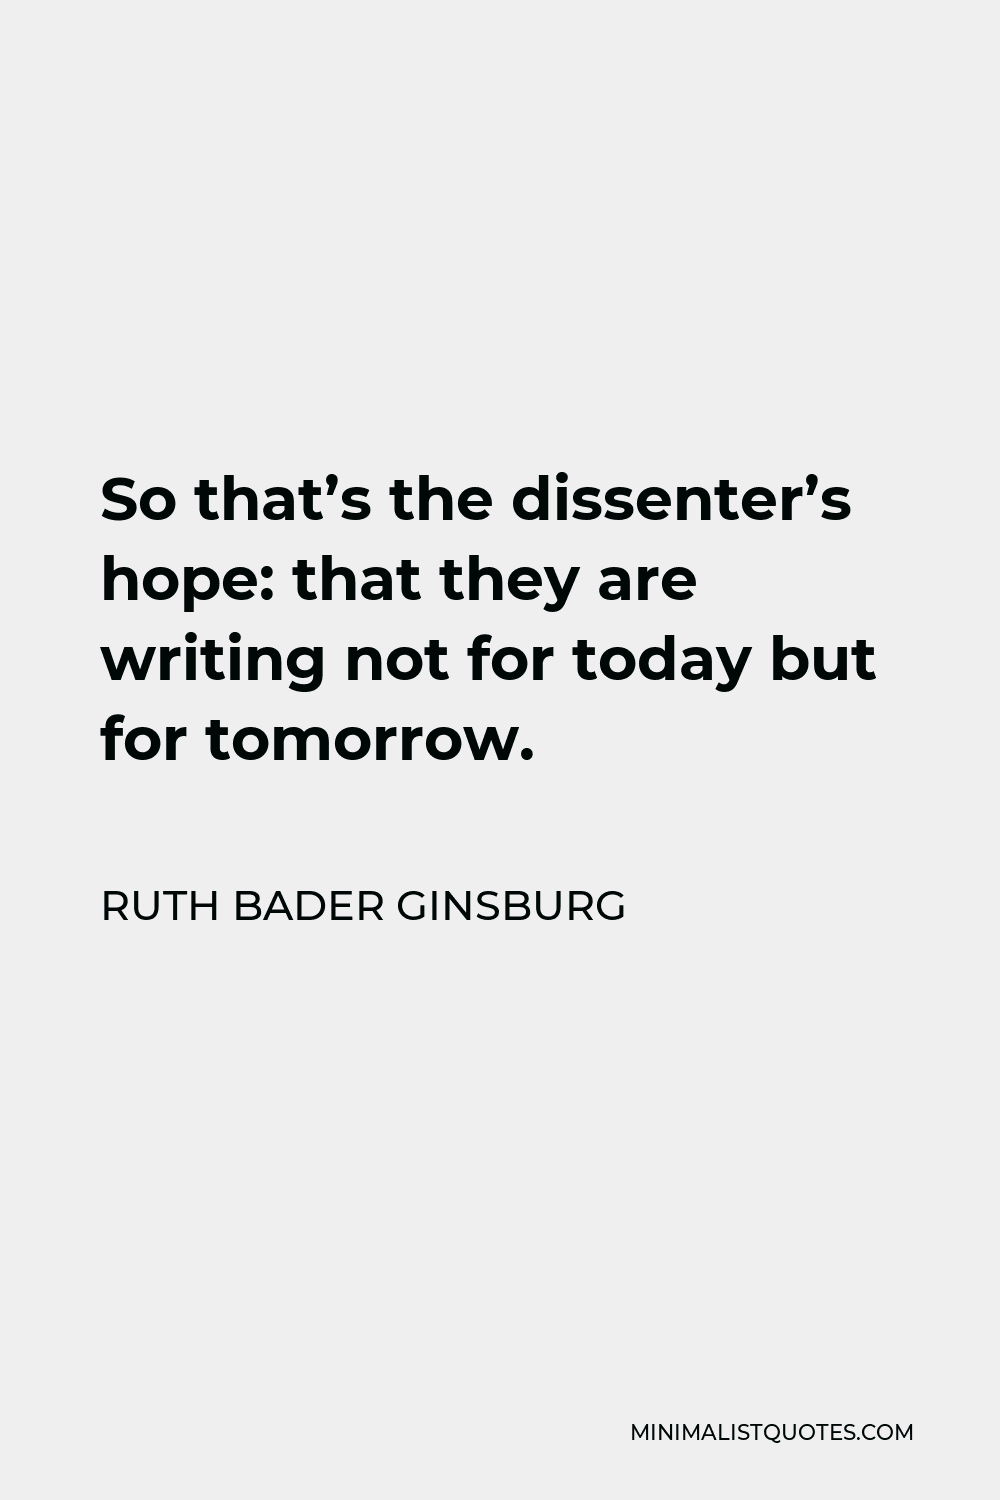 Ruth Bader Ginsburg Quote - So that’s the dissenter’s hope: that they are writing not for today but for tomorrow.